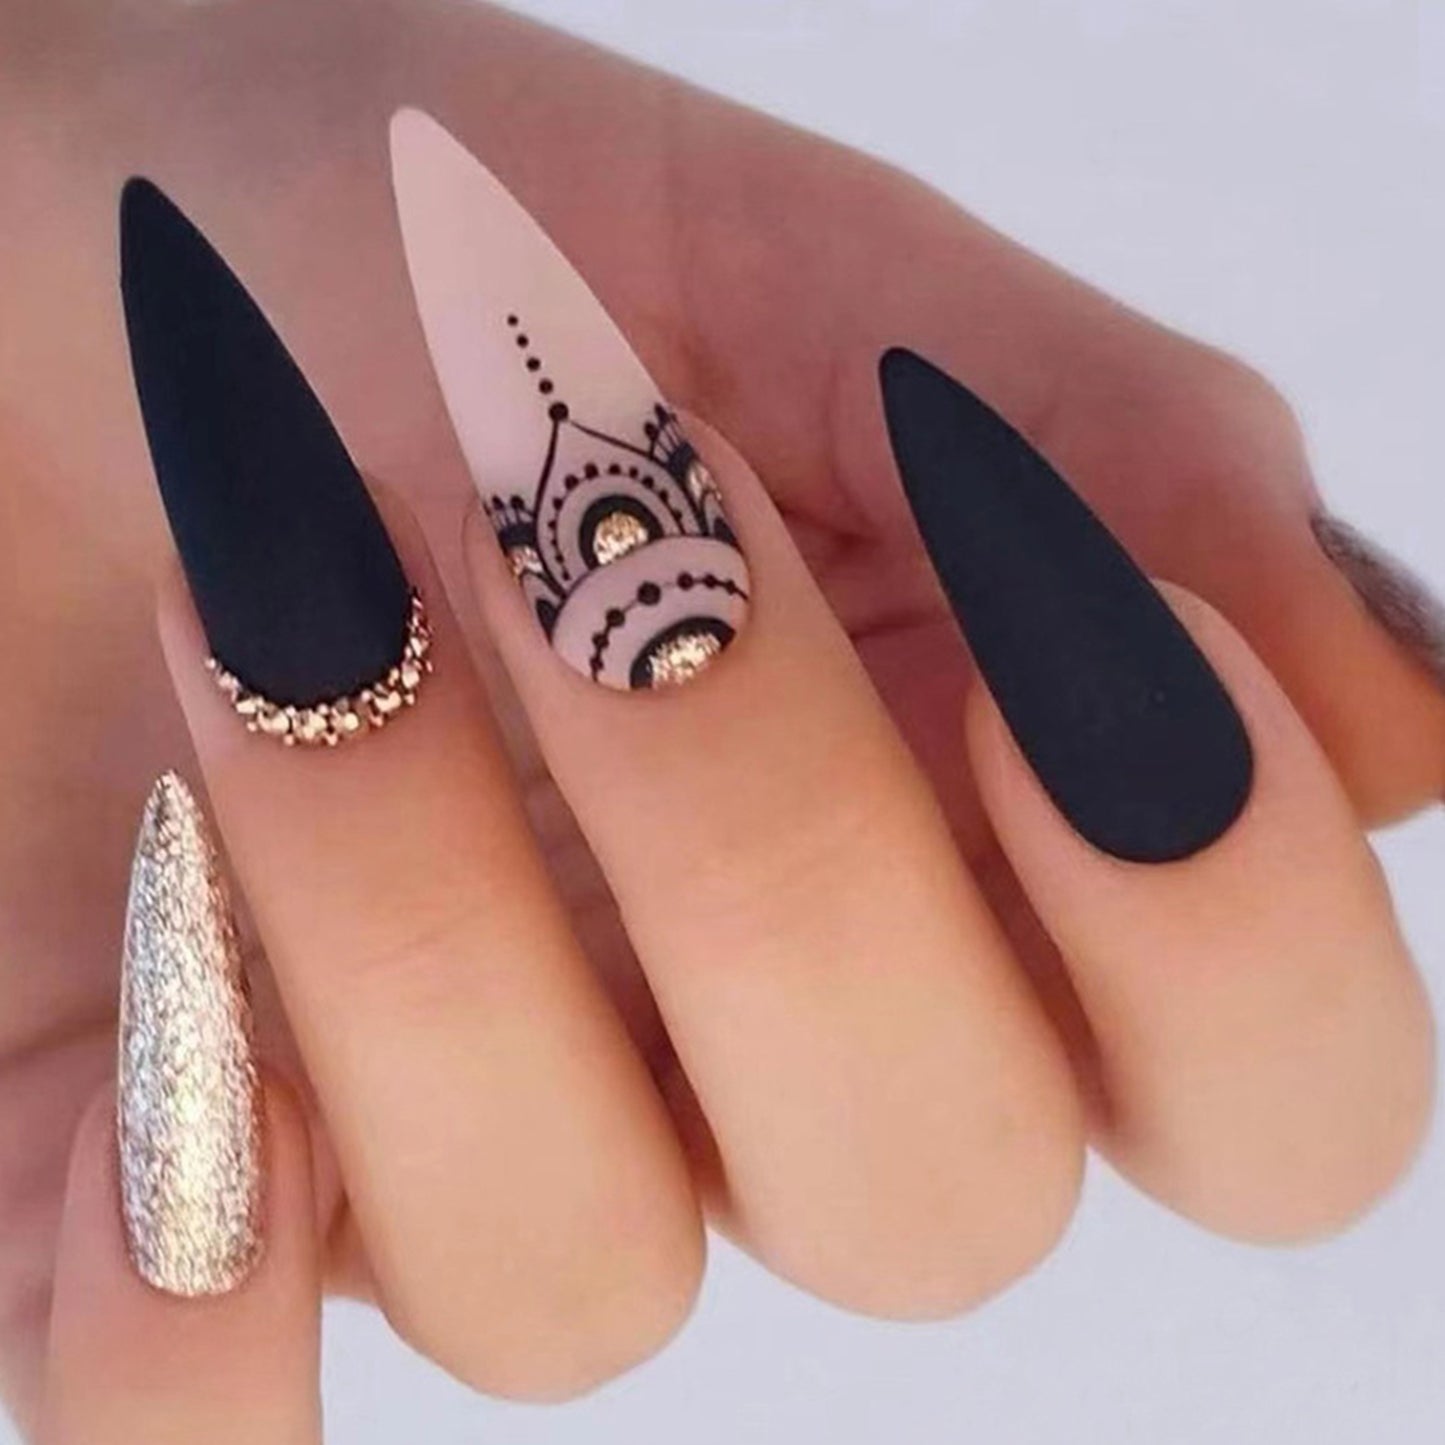 Matte Black Pointed Press-on Nails